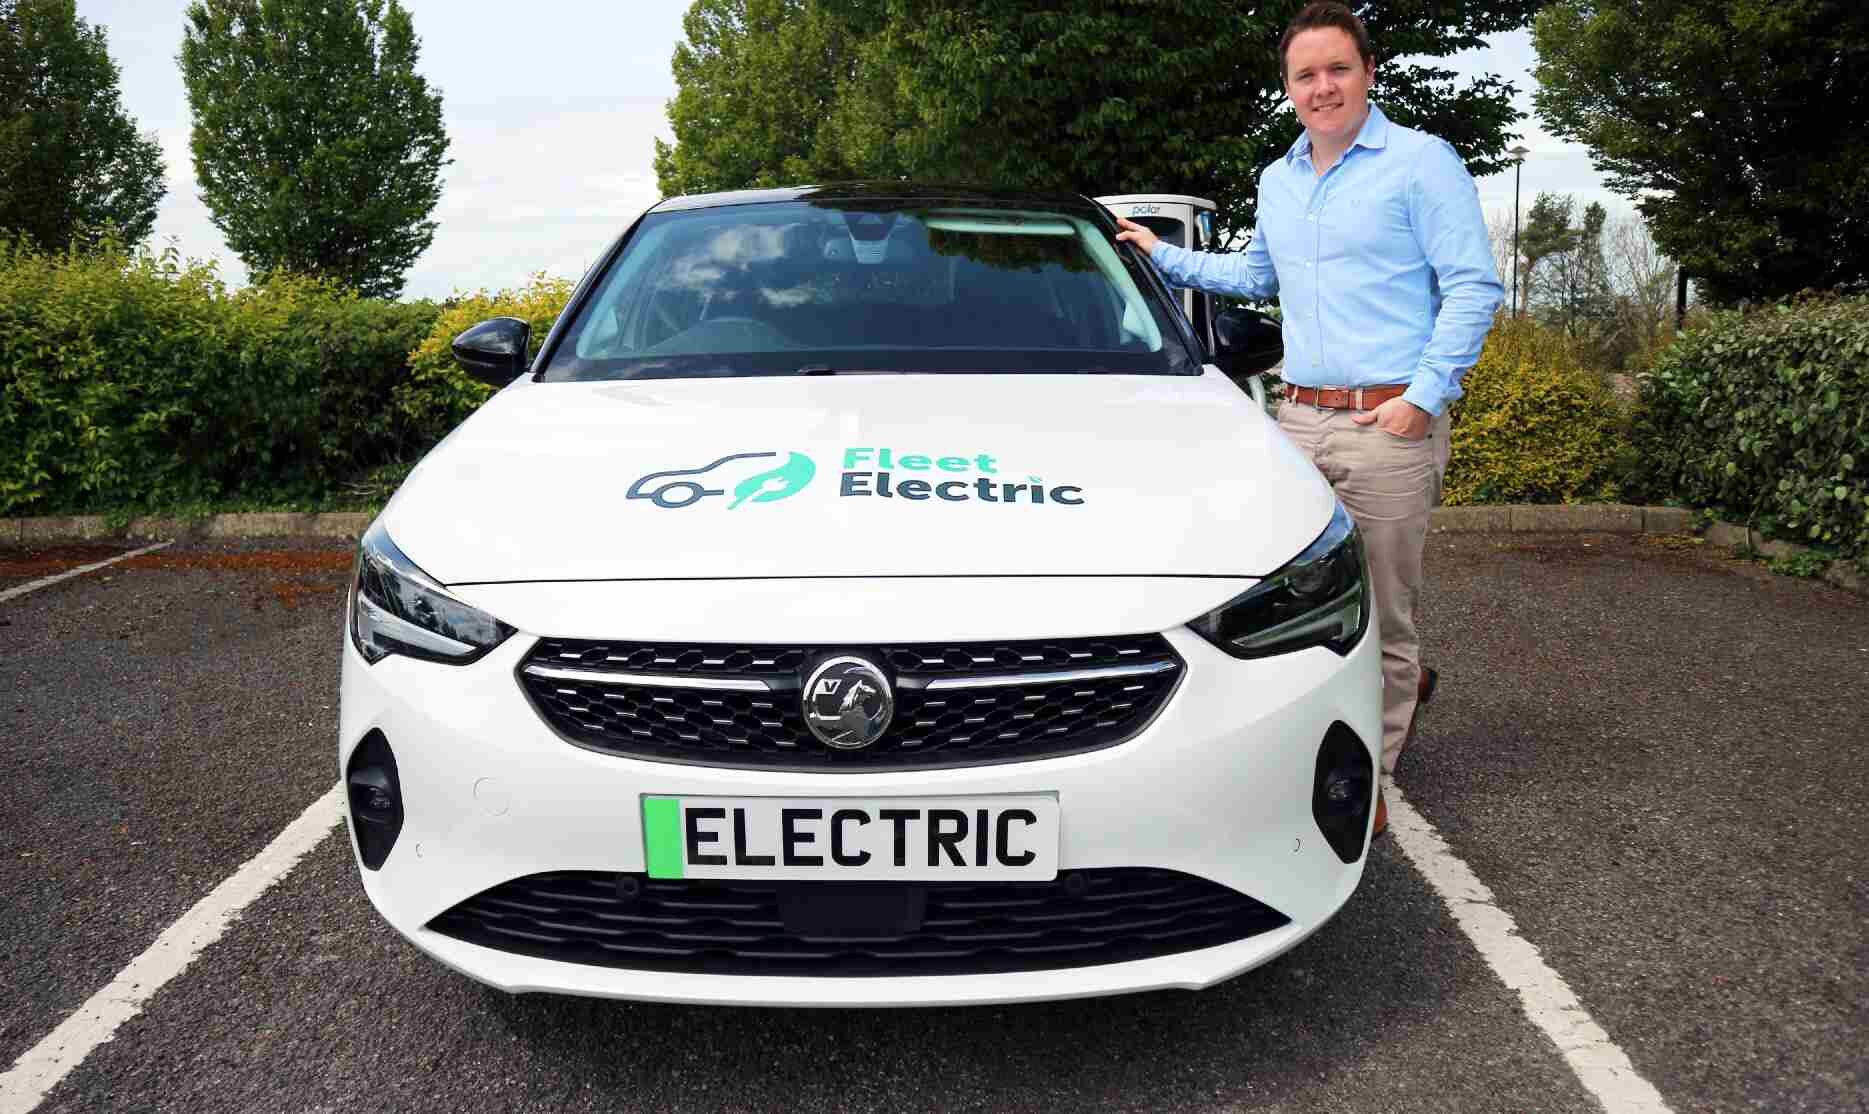 Richard Markey: - “A large portion of businesses don’t have the luxury of a dedicated fleet or transport manager to advise their organisations of the most efficient and cost-effective way to achieve an electrified fleet. This is where we can provide advice and assistance in procuring a single vehicle or transitioning an entire fleet to electric in an economical and environmentally friendly way.”